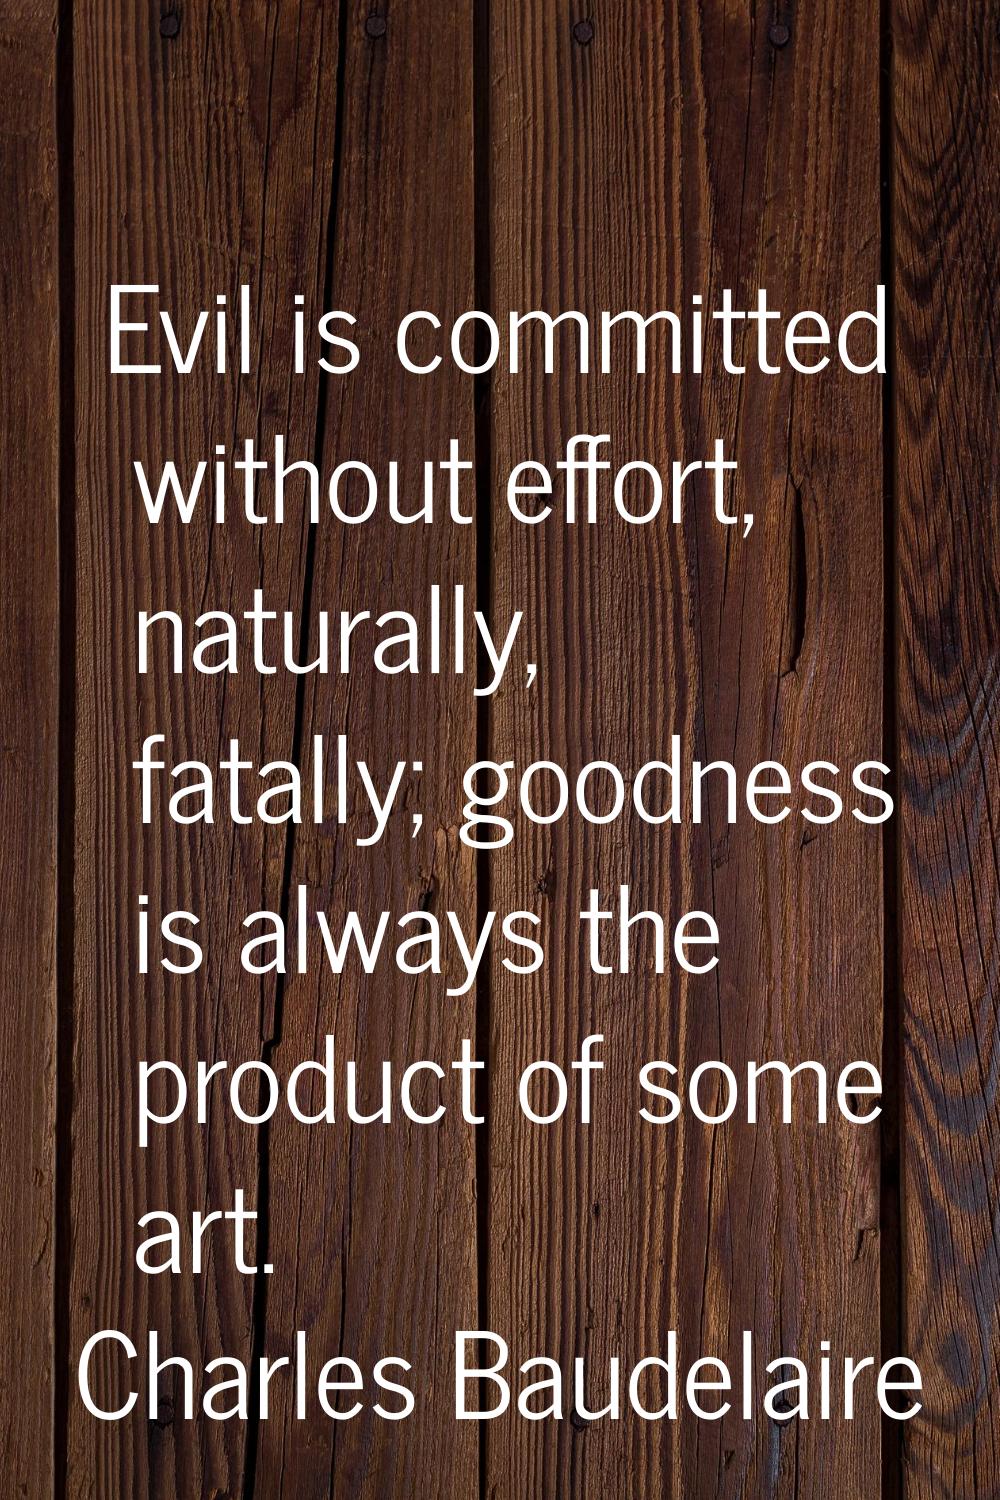 Evil is committed without effort, naturally, fatally; goodness is always the product of some art.